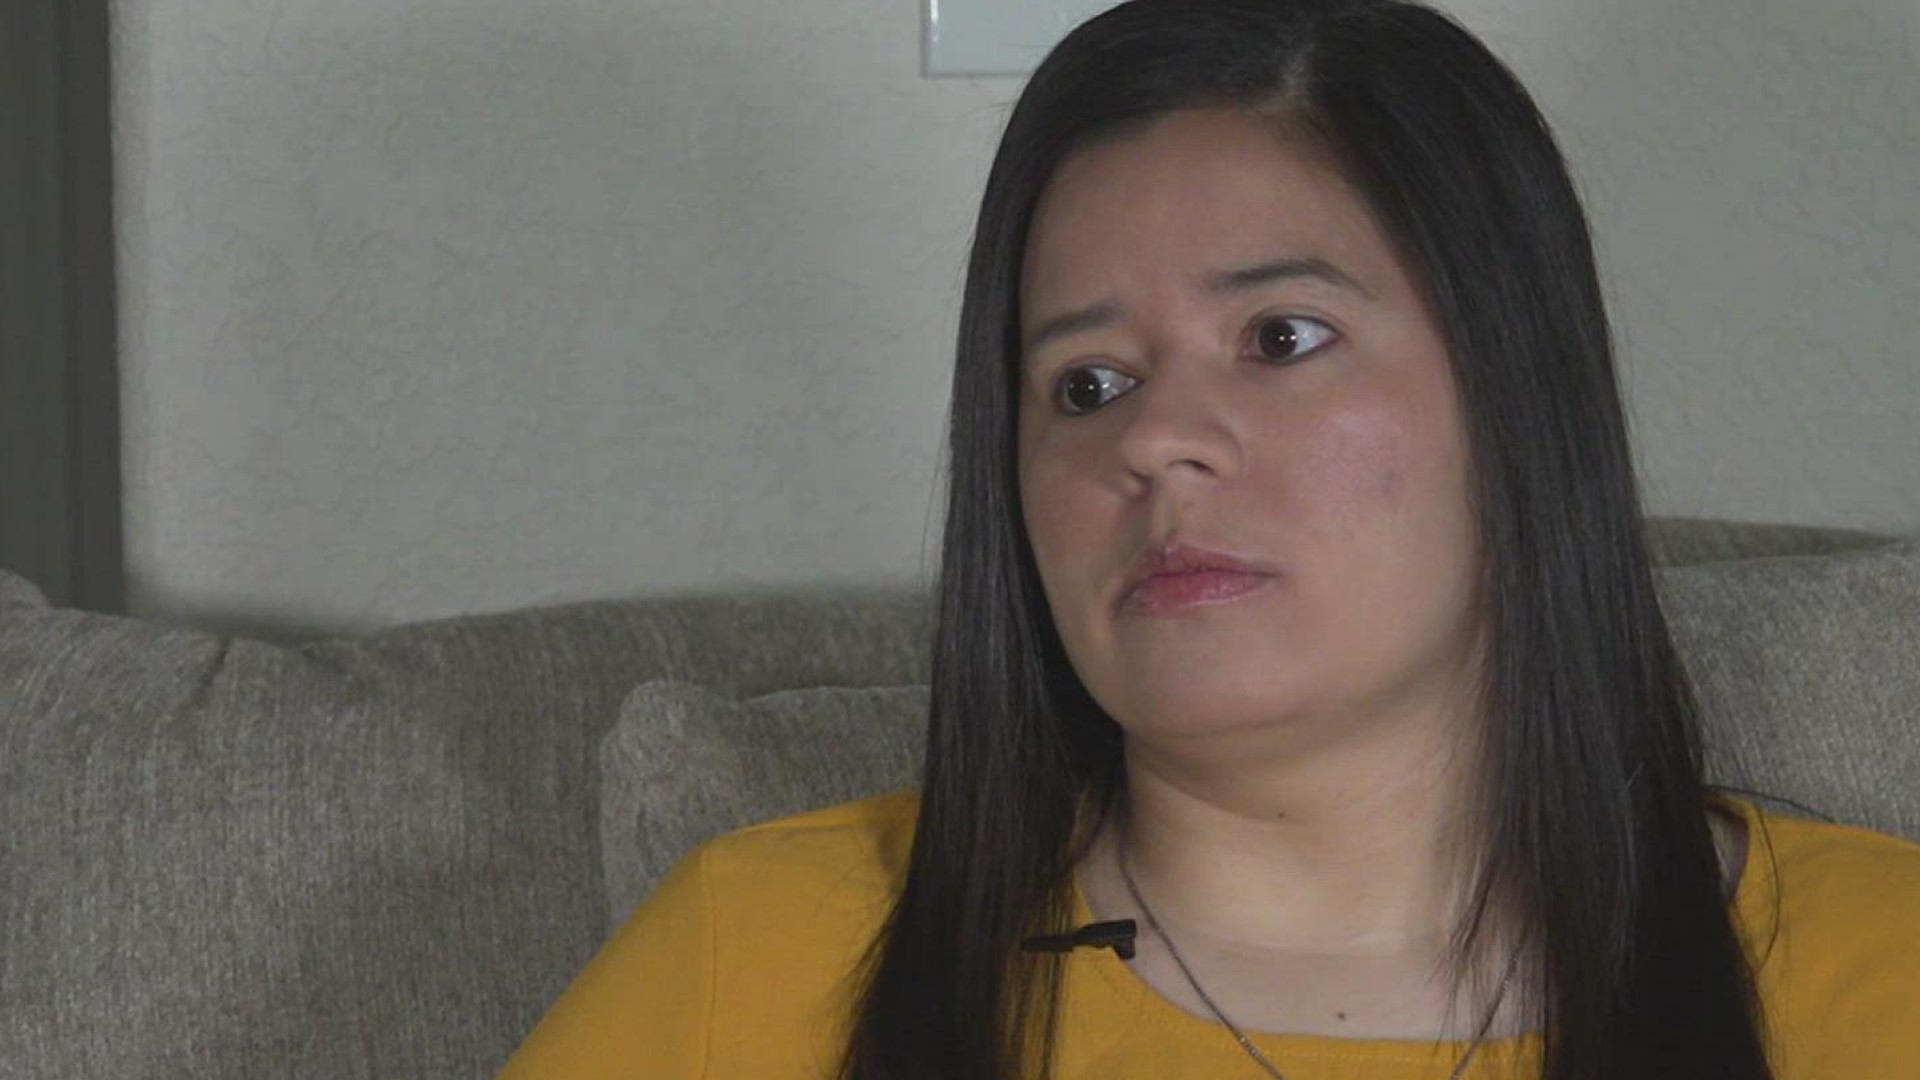 The sole survivor of a horrific attack in Portland, Kristene Chapa will be sharing her story in a new documentary filming this week.